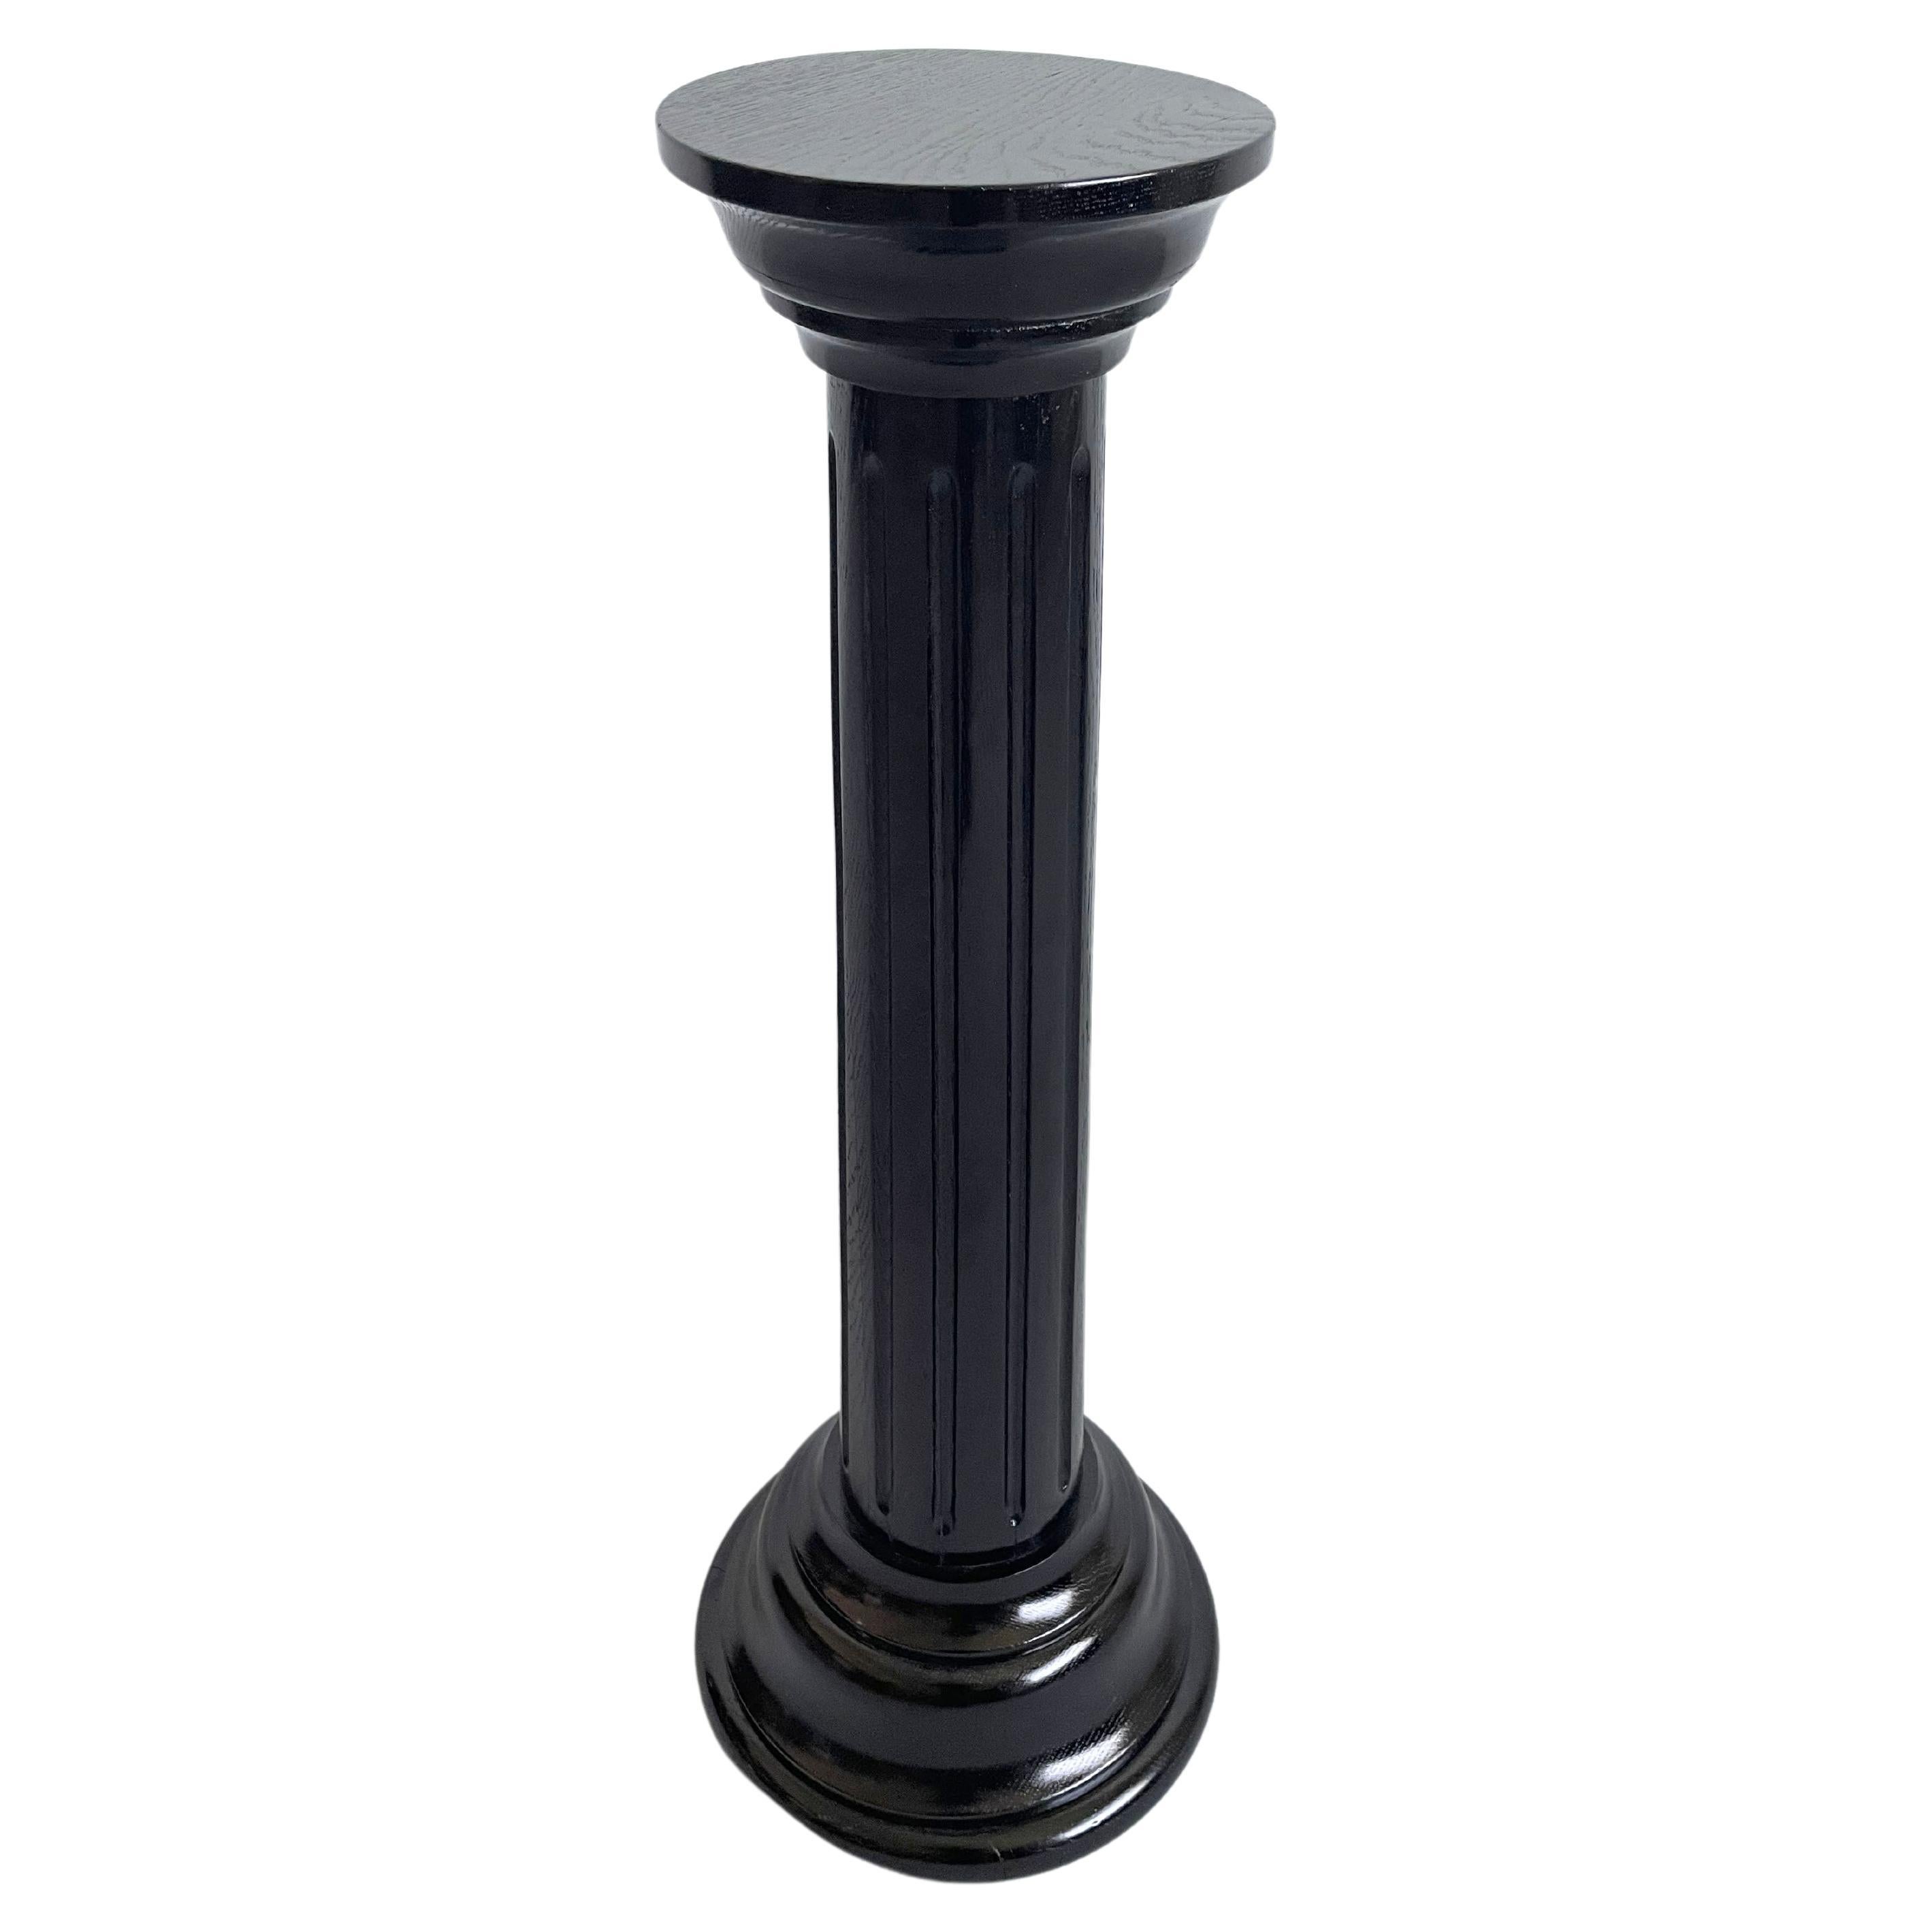 Beautifully Restored Neoclassical Column Pedestal Stand, Late 19th Century